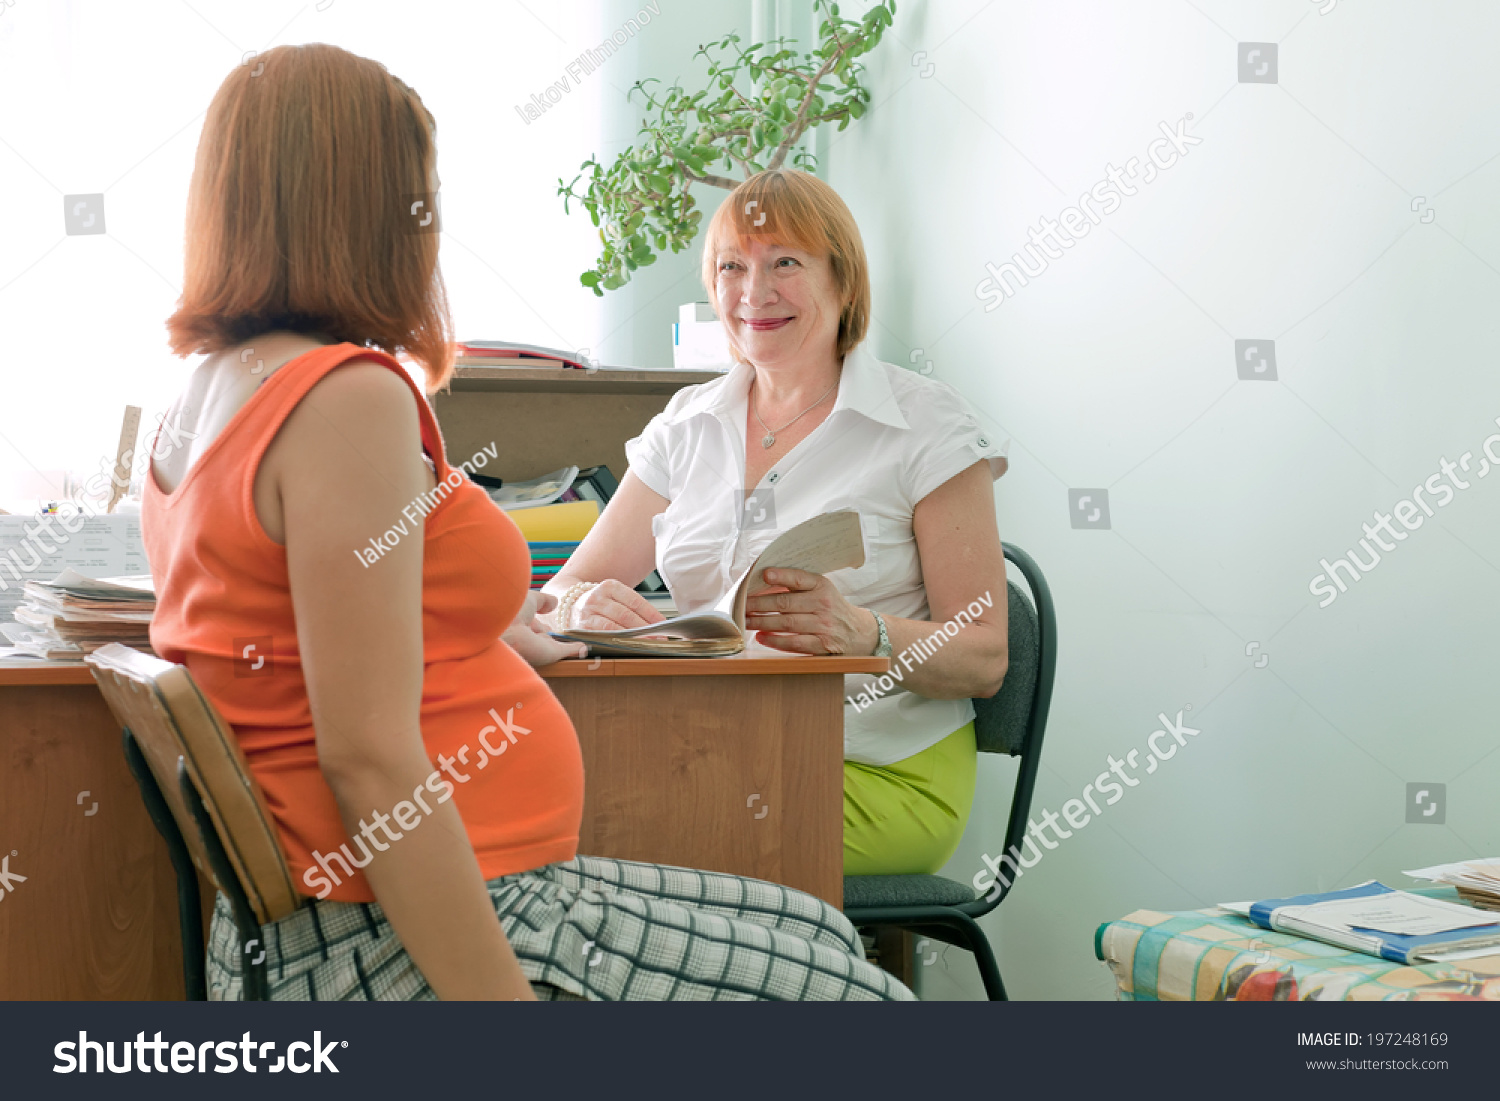 Clinic For Pregnant Woman 37